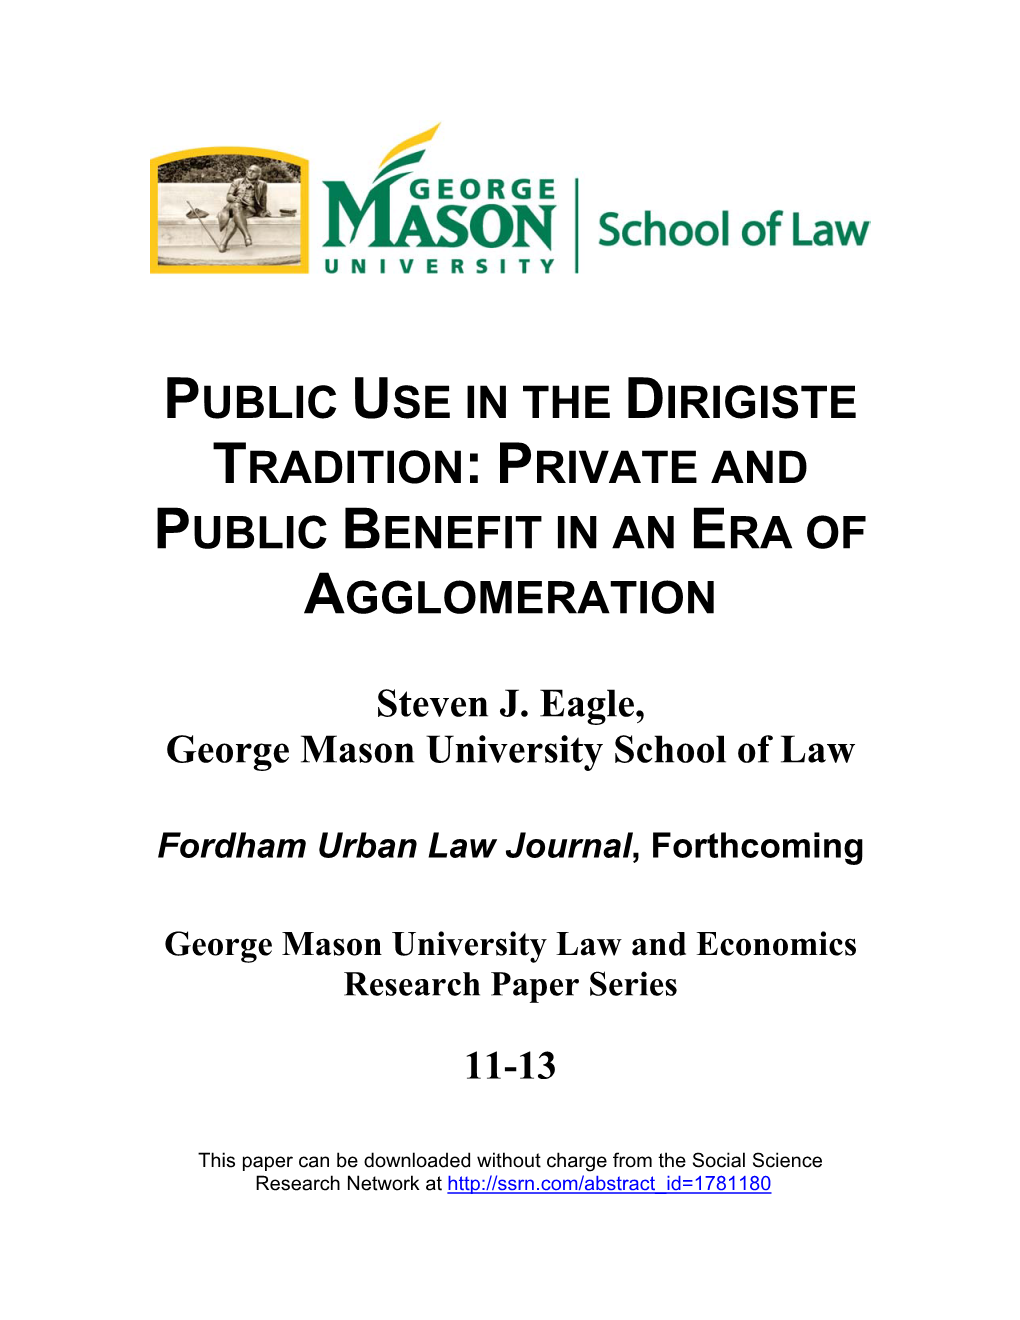 Public Use in the Dirigiste Tradition: Private and Public Benefit in an Era of Agglomeration